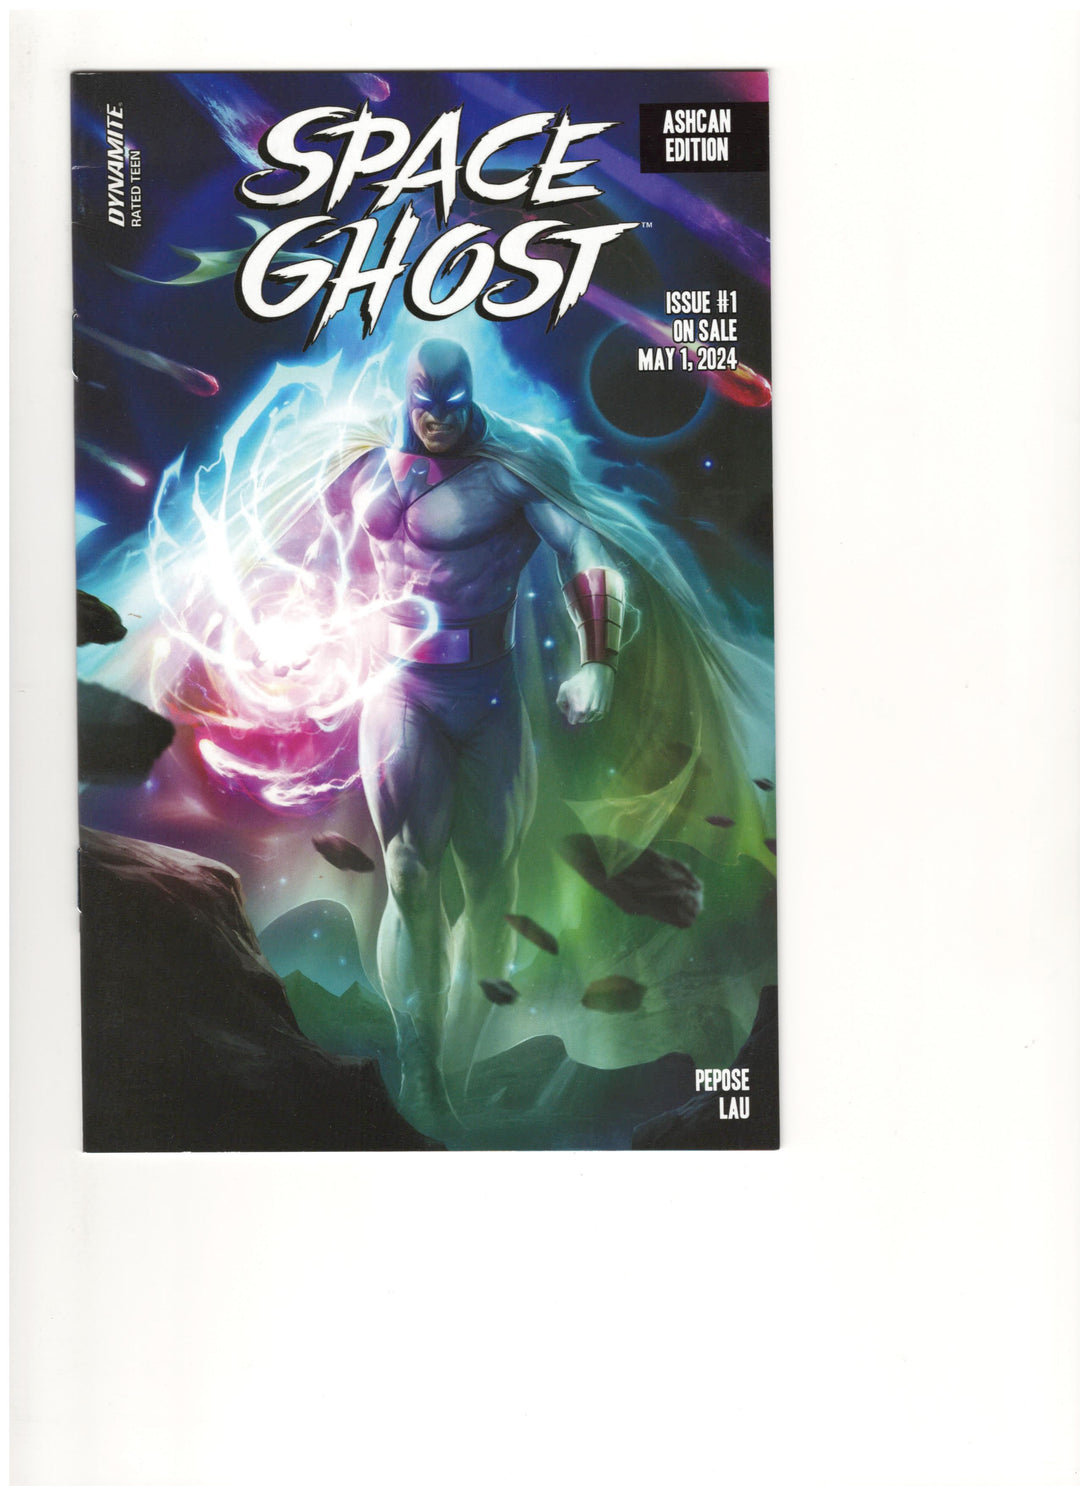 Space Ghost #1 Ashcan Limited Preview Edition